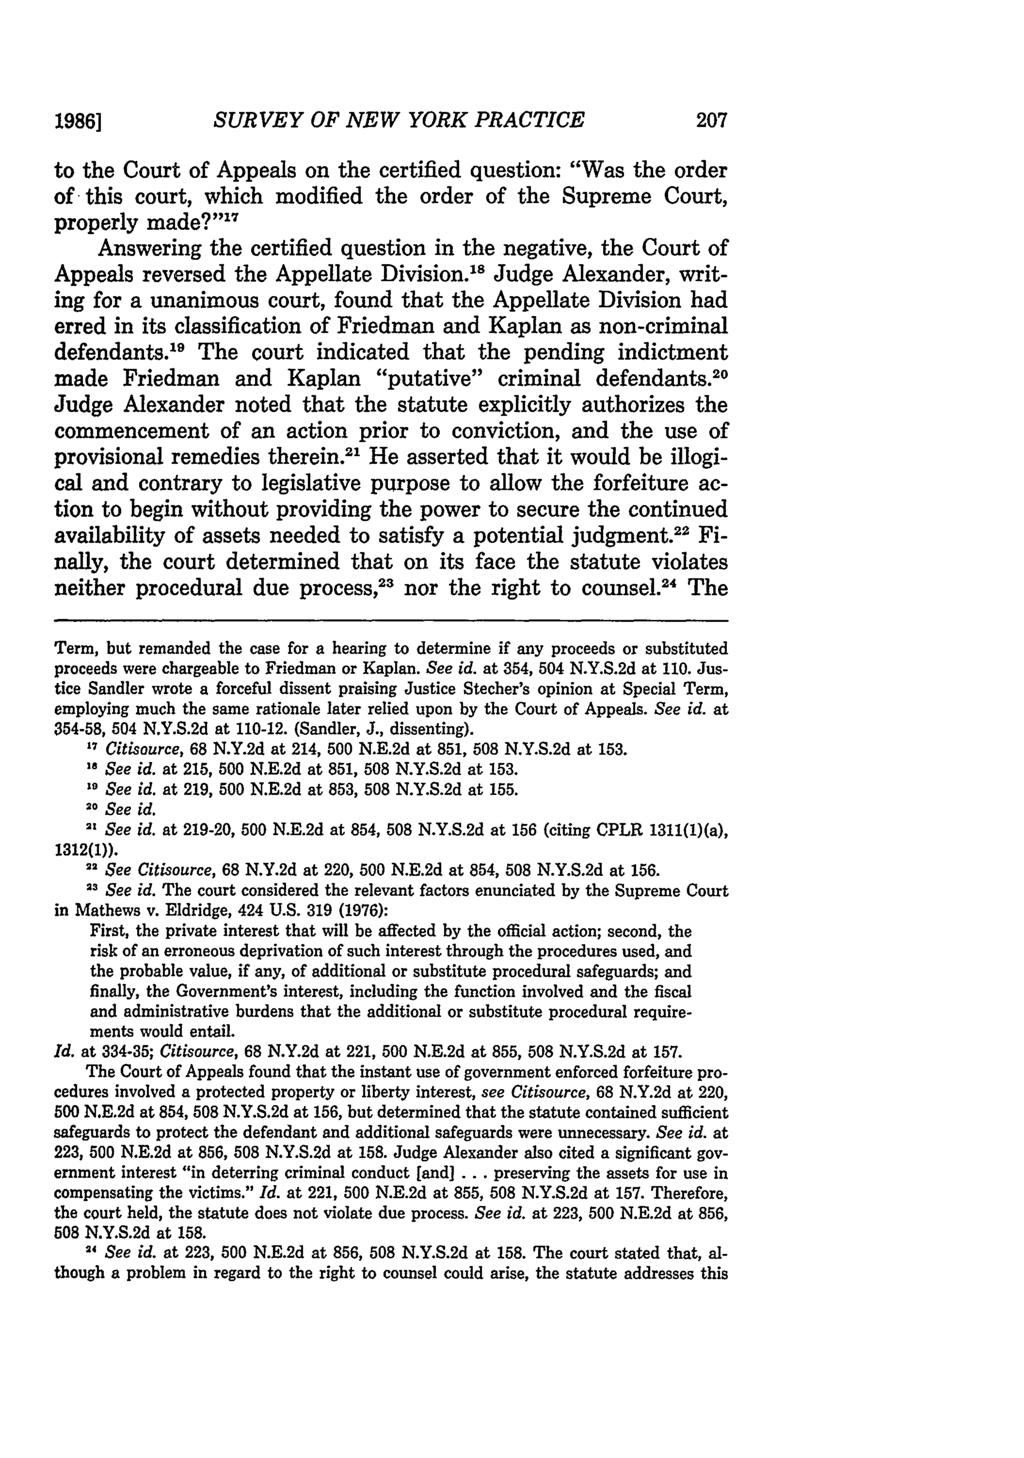 1986] SURVEY OF NEW YORK PRACTICE to the Court of Appeals on the certified question: "Was the order of this court, which modified the order of the Supreme Court, properly made?